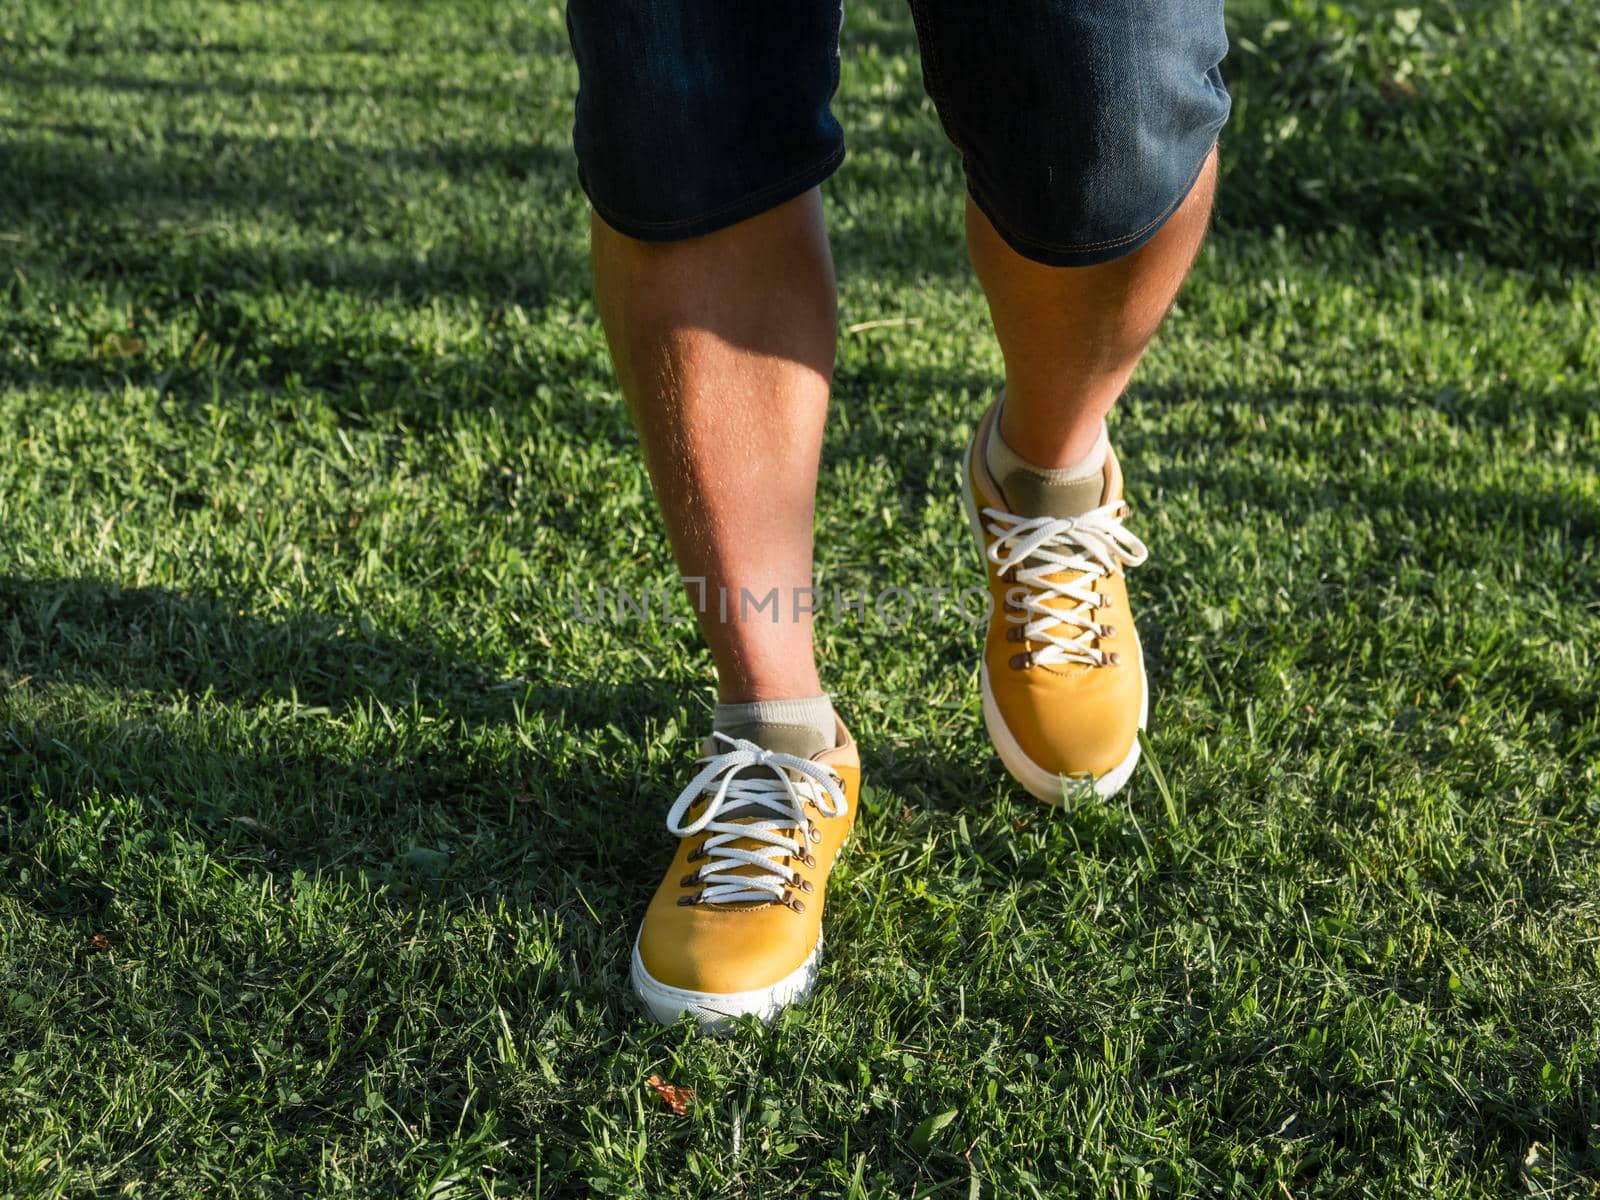 Man in bright yellow sneakers is standing on green grass lawn in park. Modern hipster's shoes. Urban fashion.